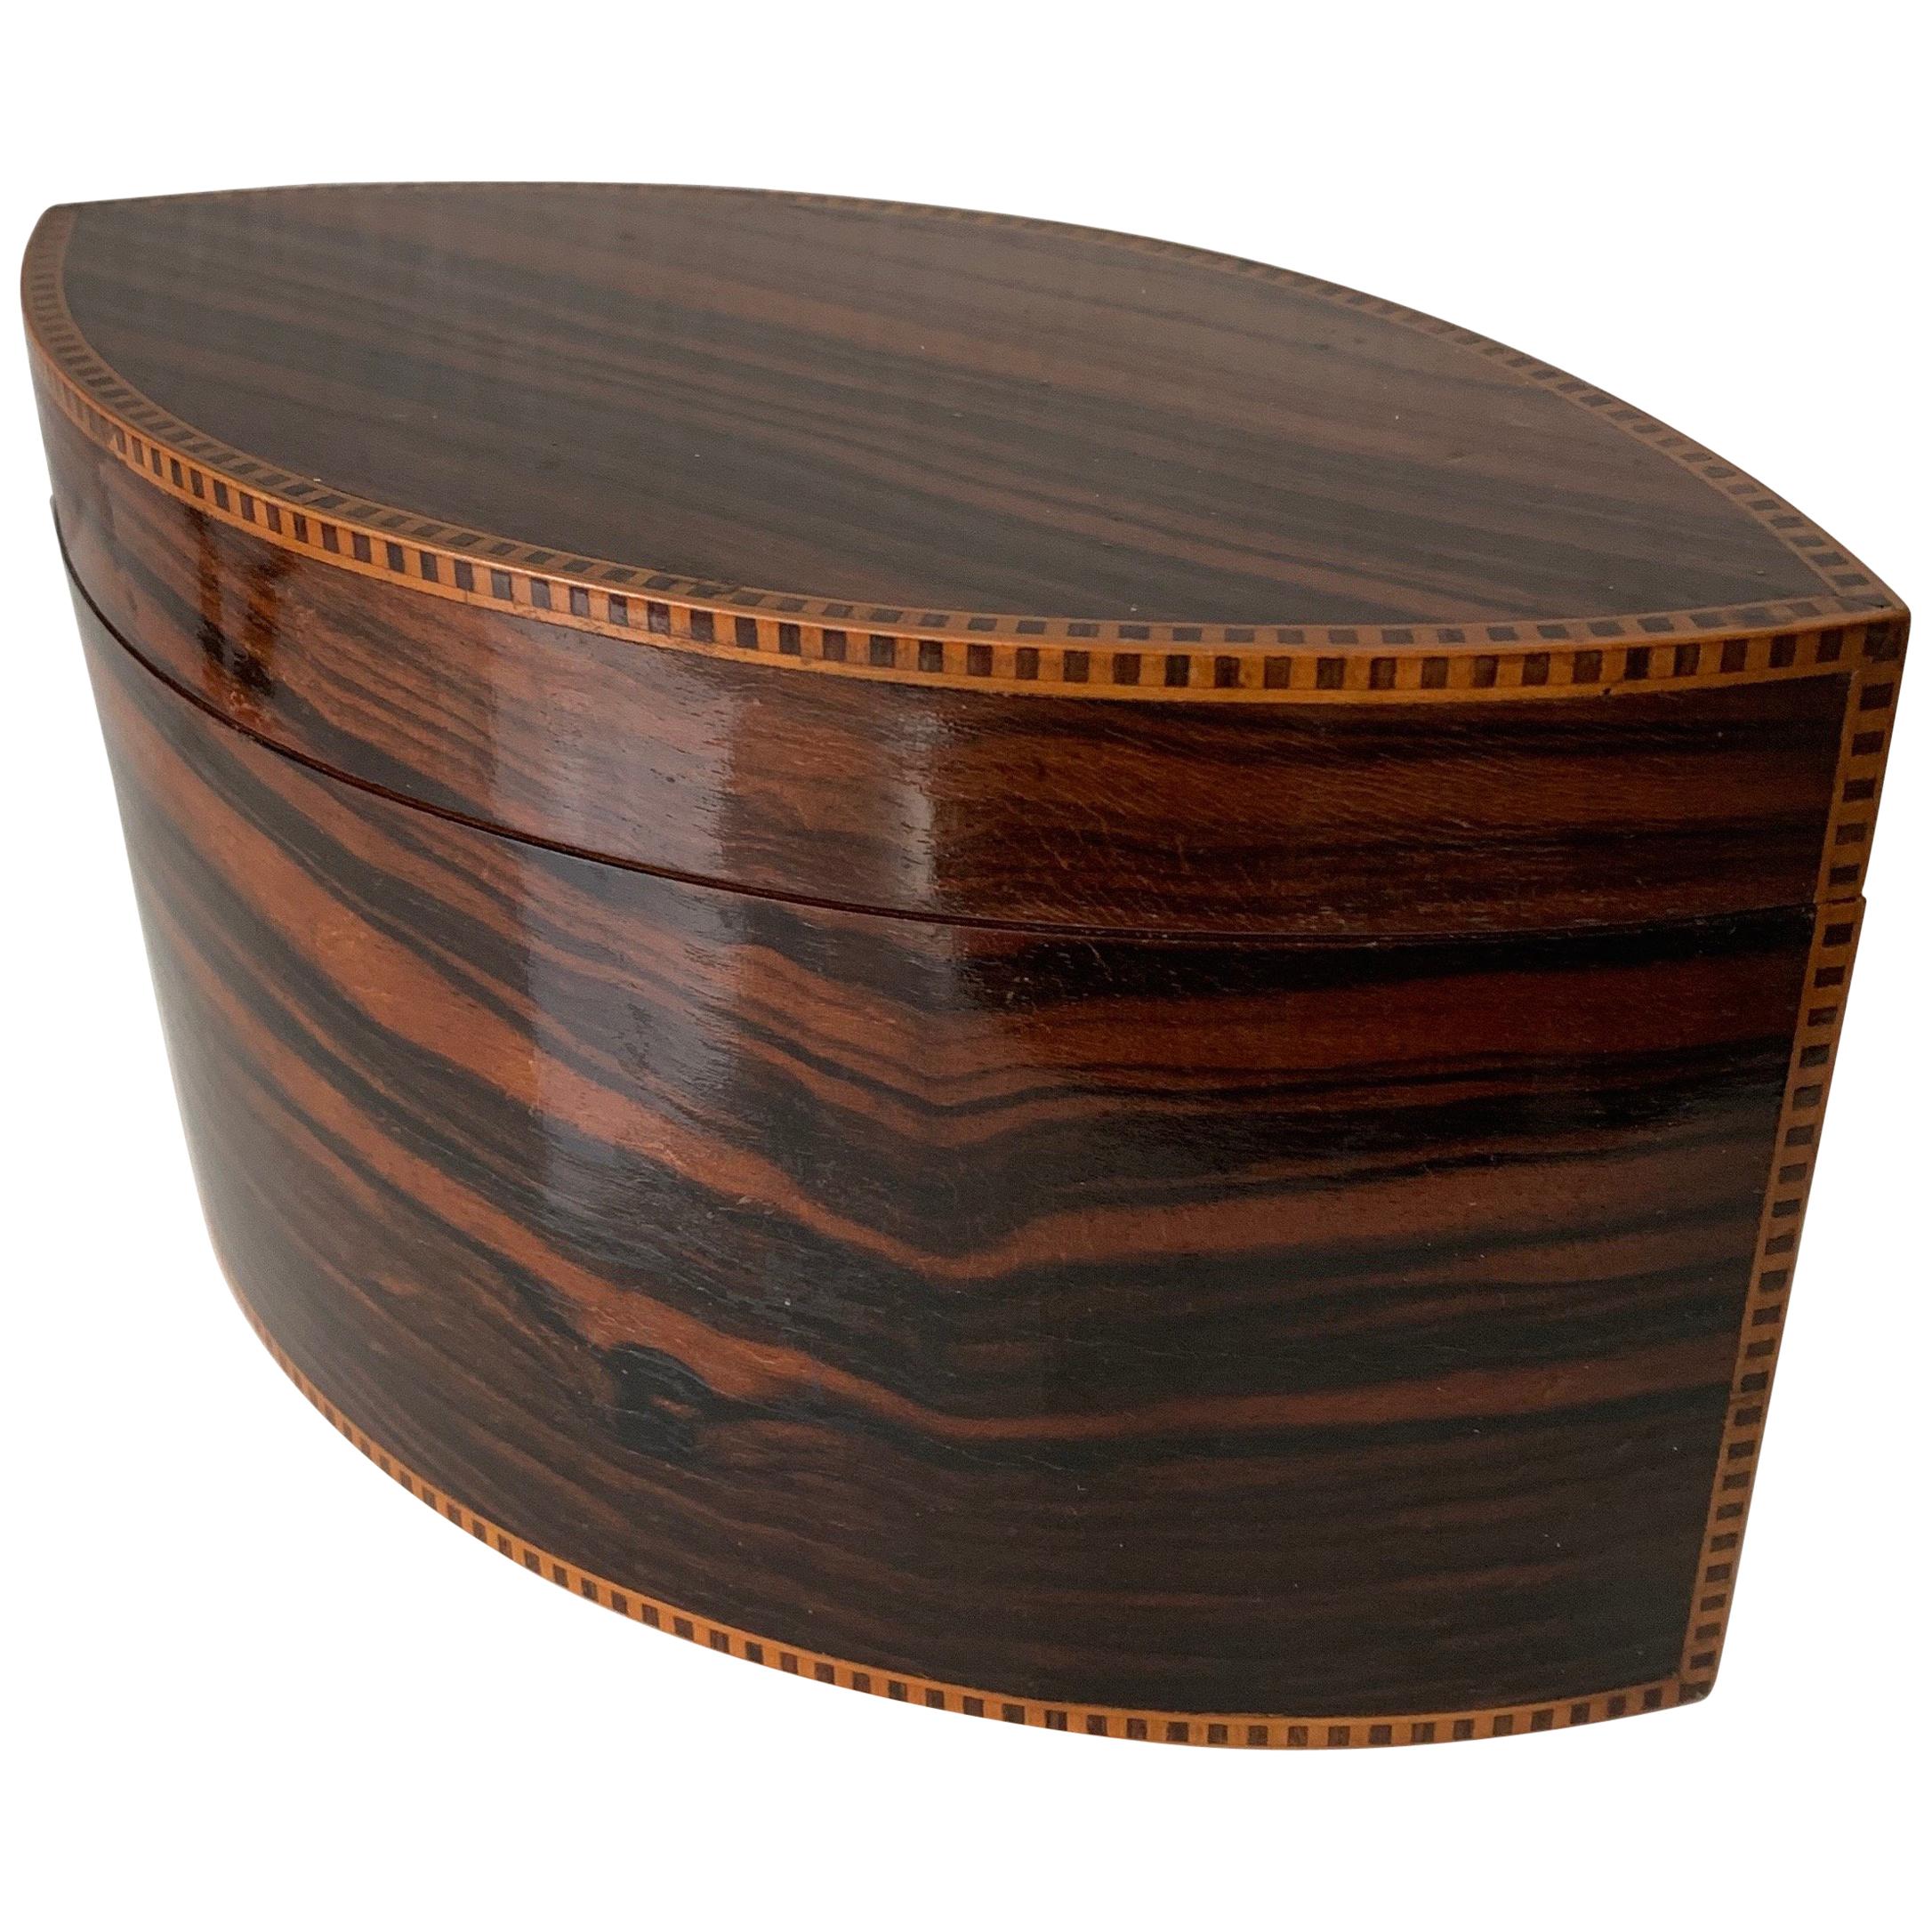 Top Quality and Stunning Shape Art Deco Nutwood, Hardwood and Satinwood Box, 